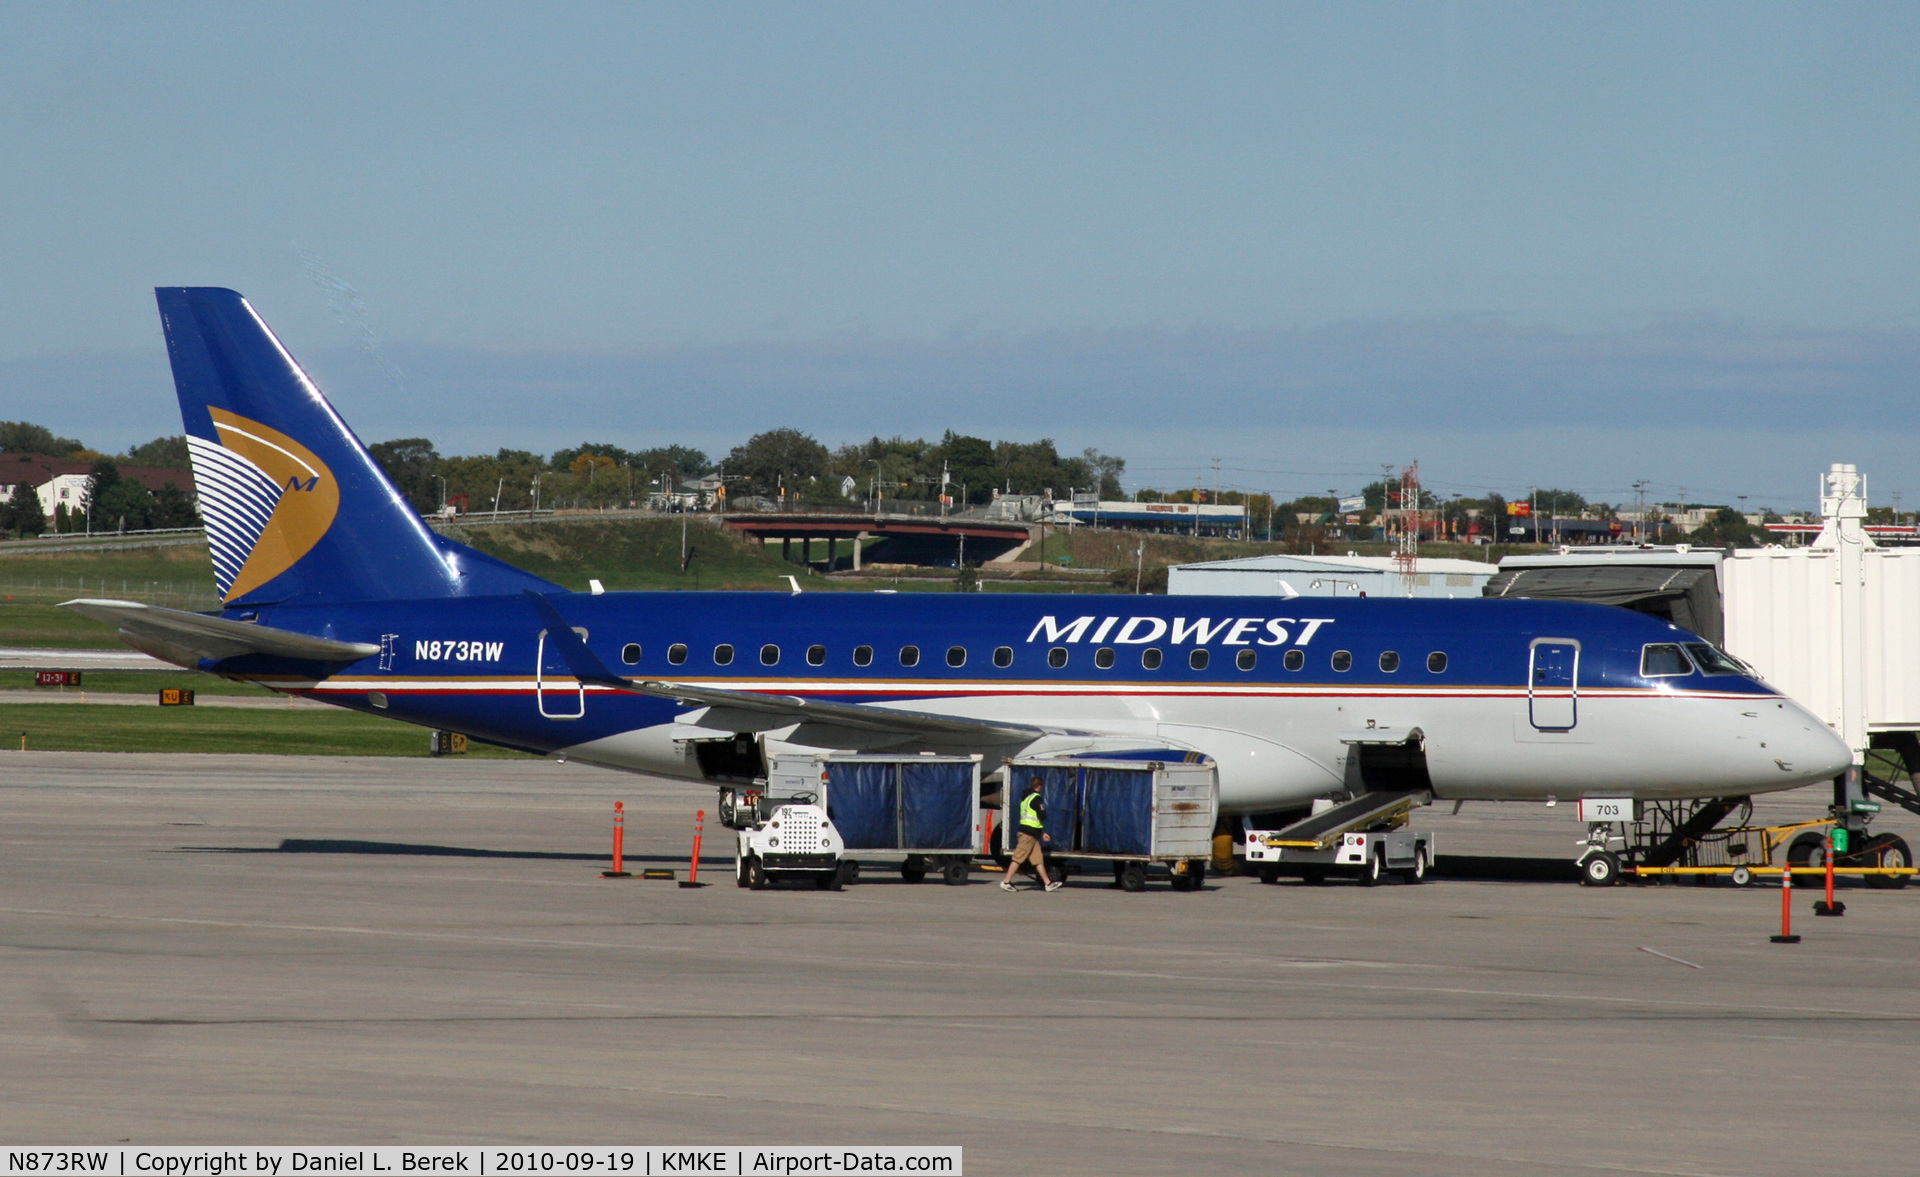 N873RW, 2006 Embraer 170SU (ERJ-170-100SU) C/N 17000144, Soon the beautiful Midwest livery will be history.